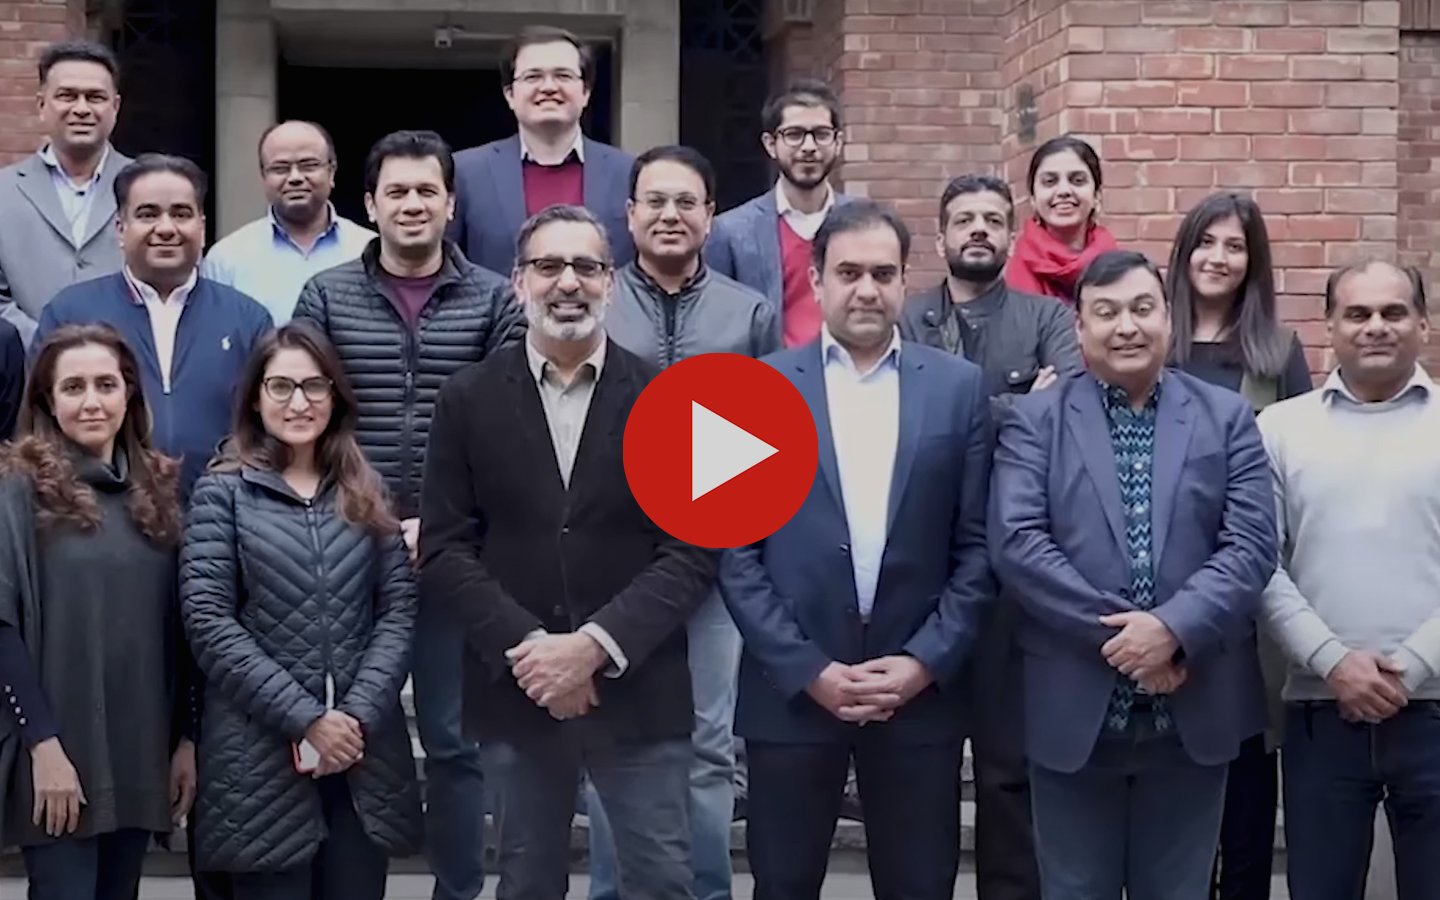 Watch the inspiring impact Dr. Ahmad has had on the LUMS community